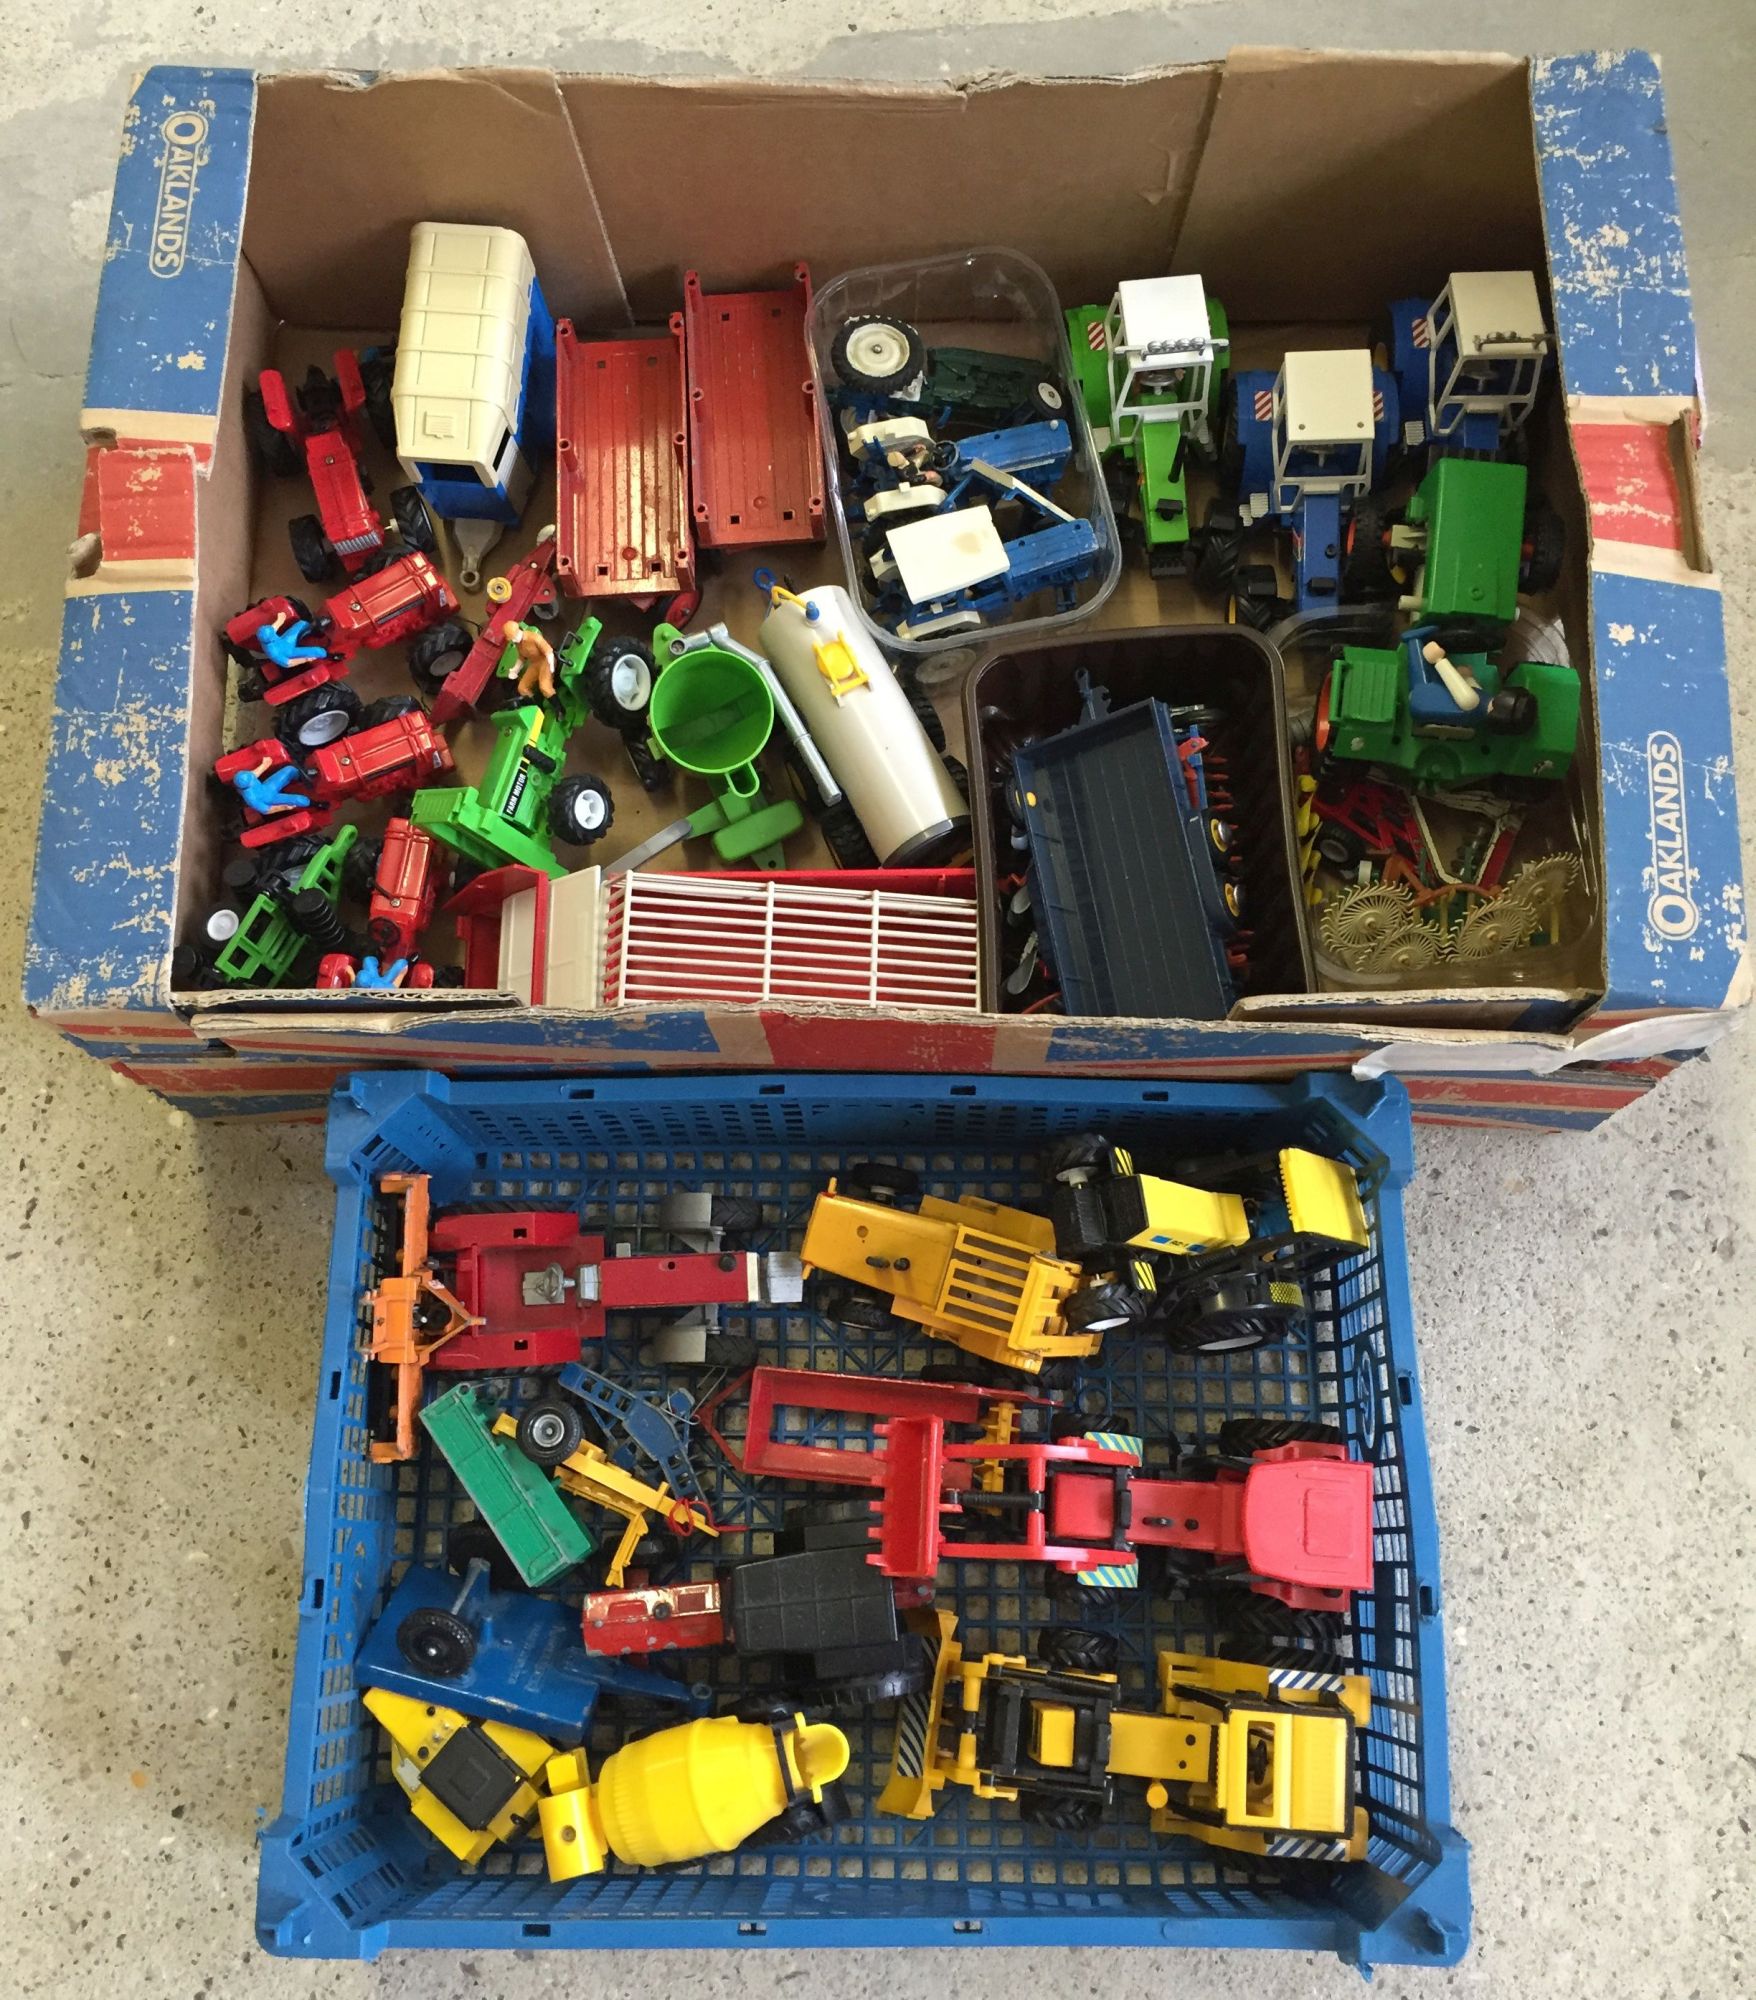 2 boxes of toy tractors and accessories.